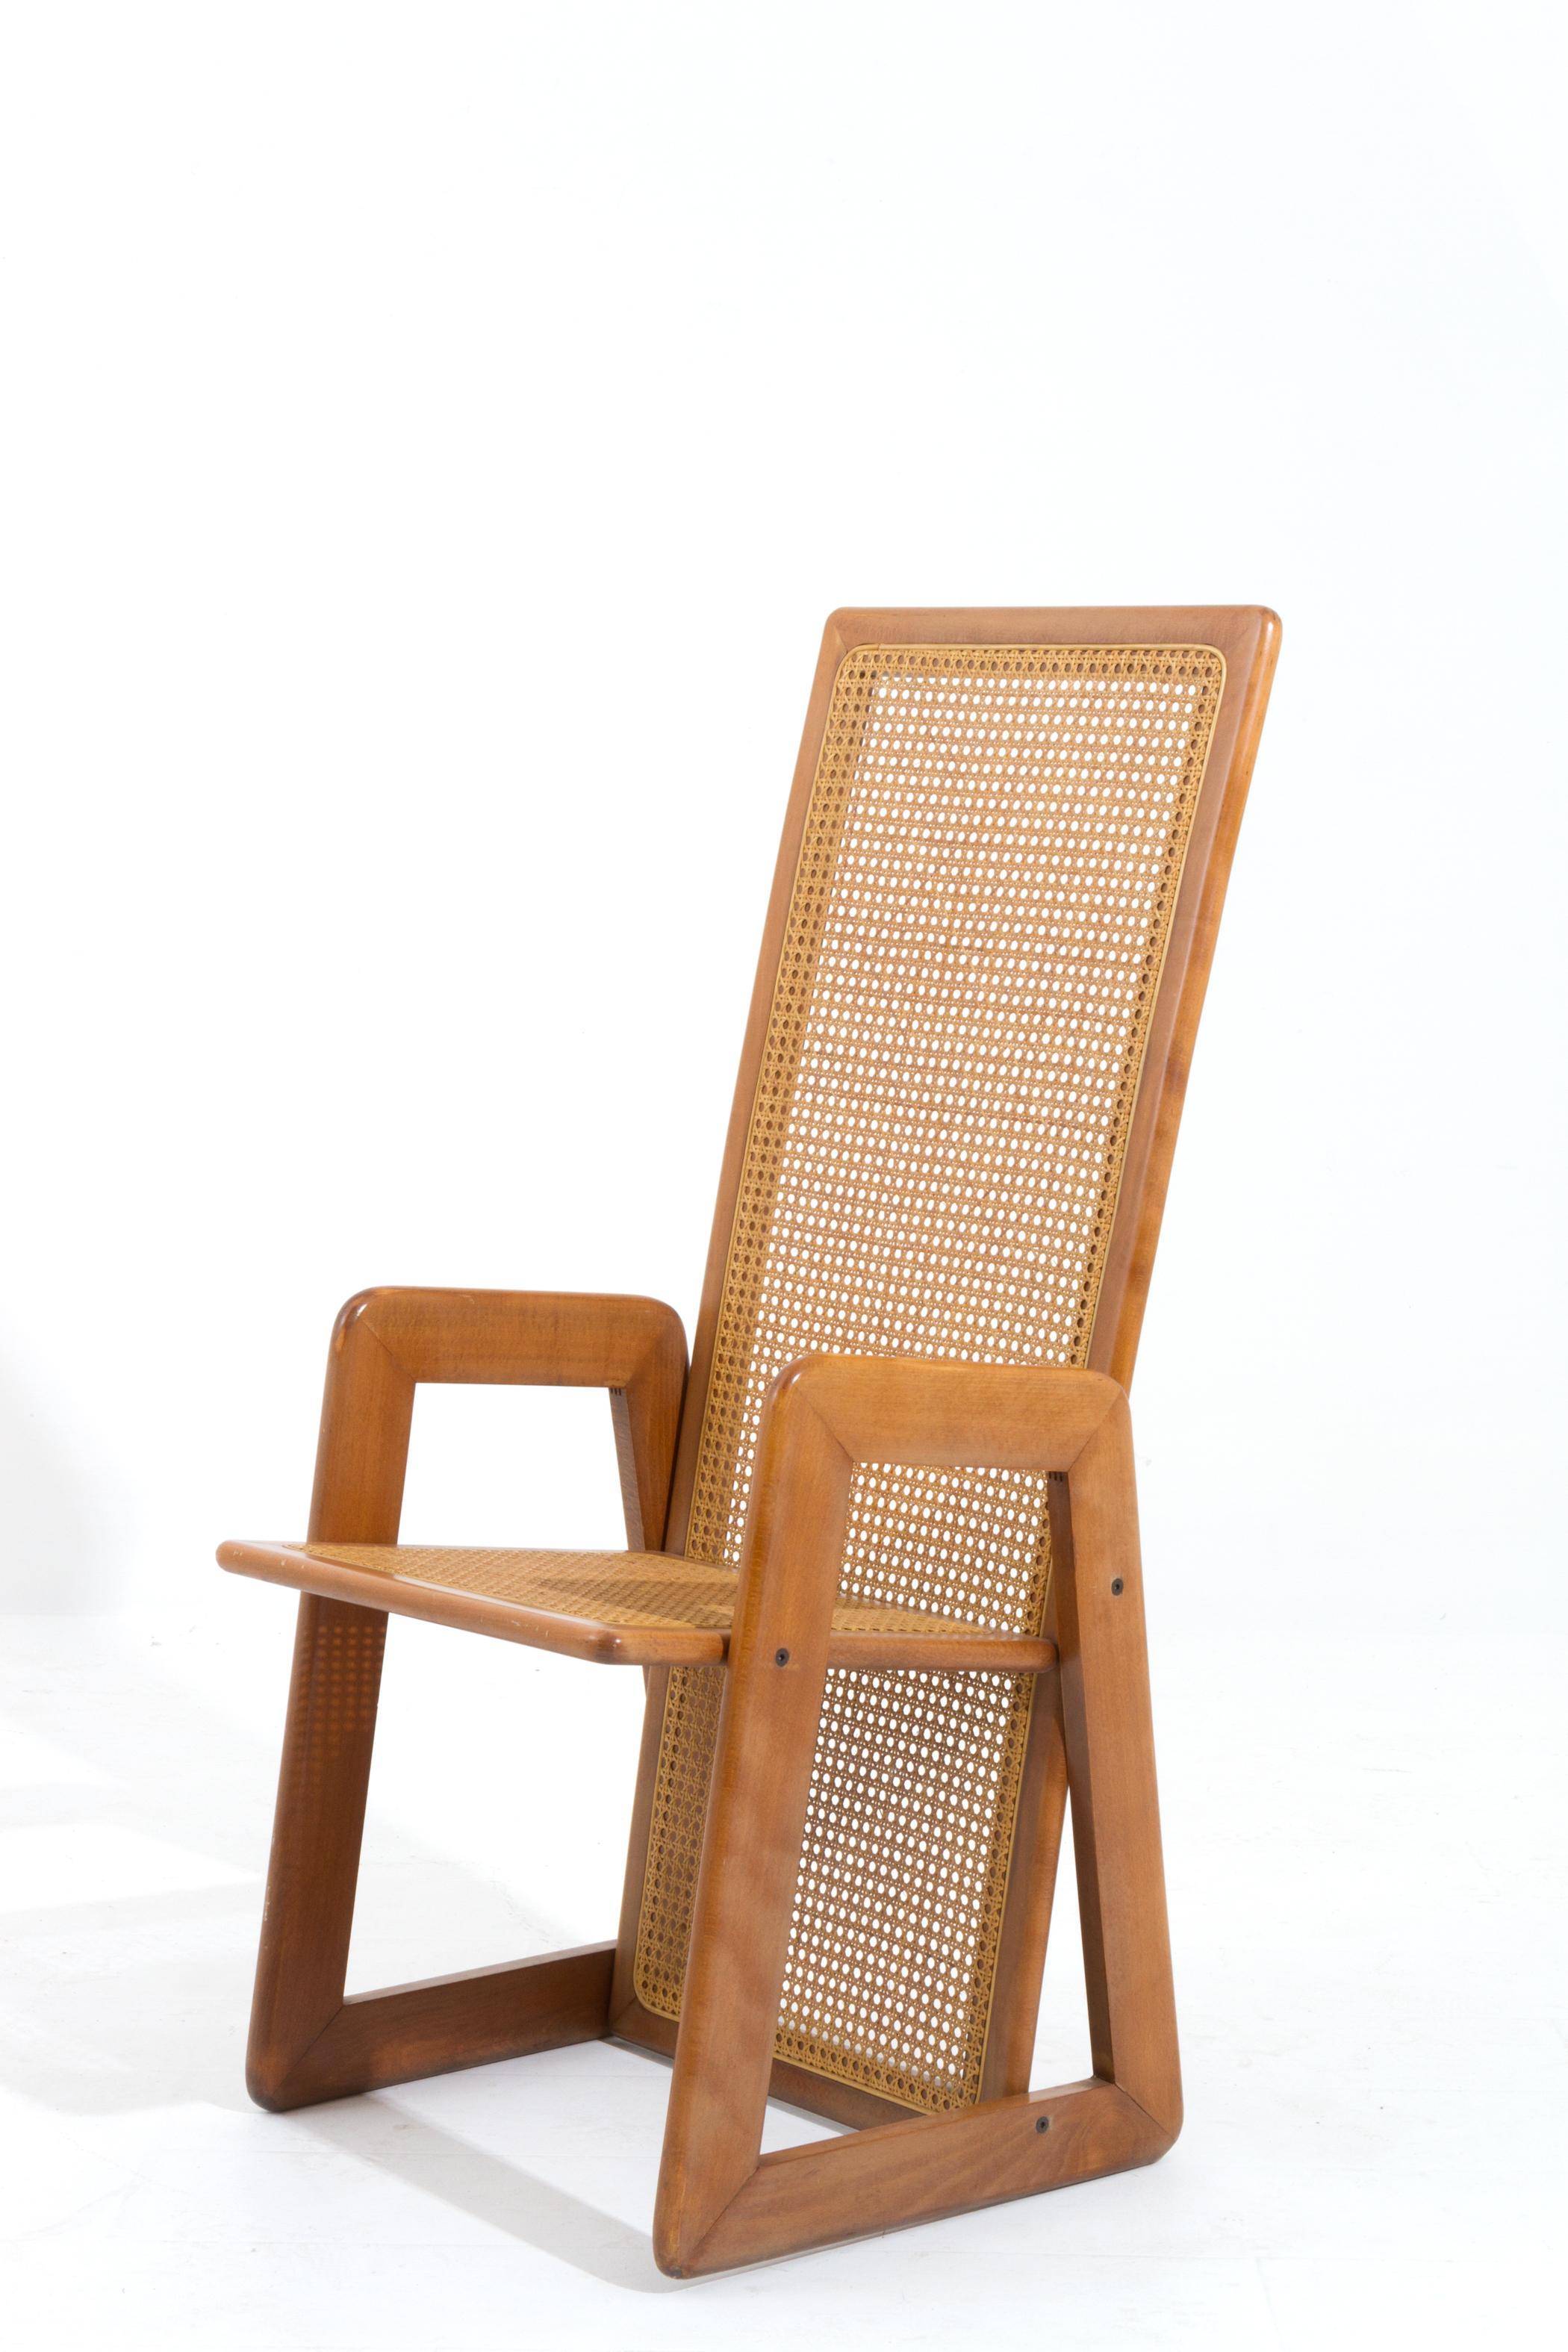 Fabio Lenci set of 6 chairs In Excellent Condition For Sale In Los Angeles, CA